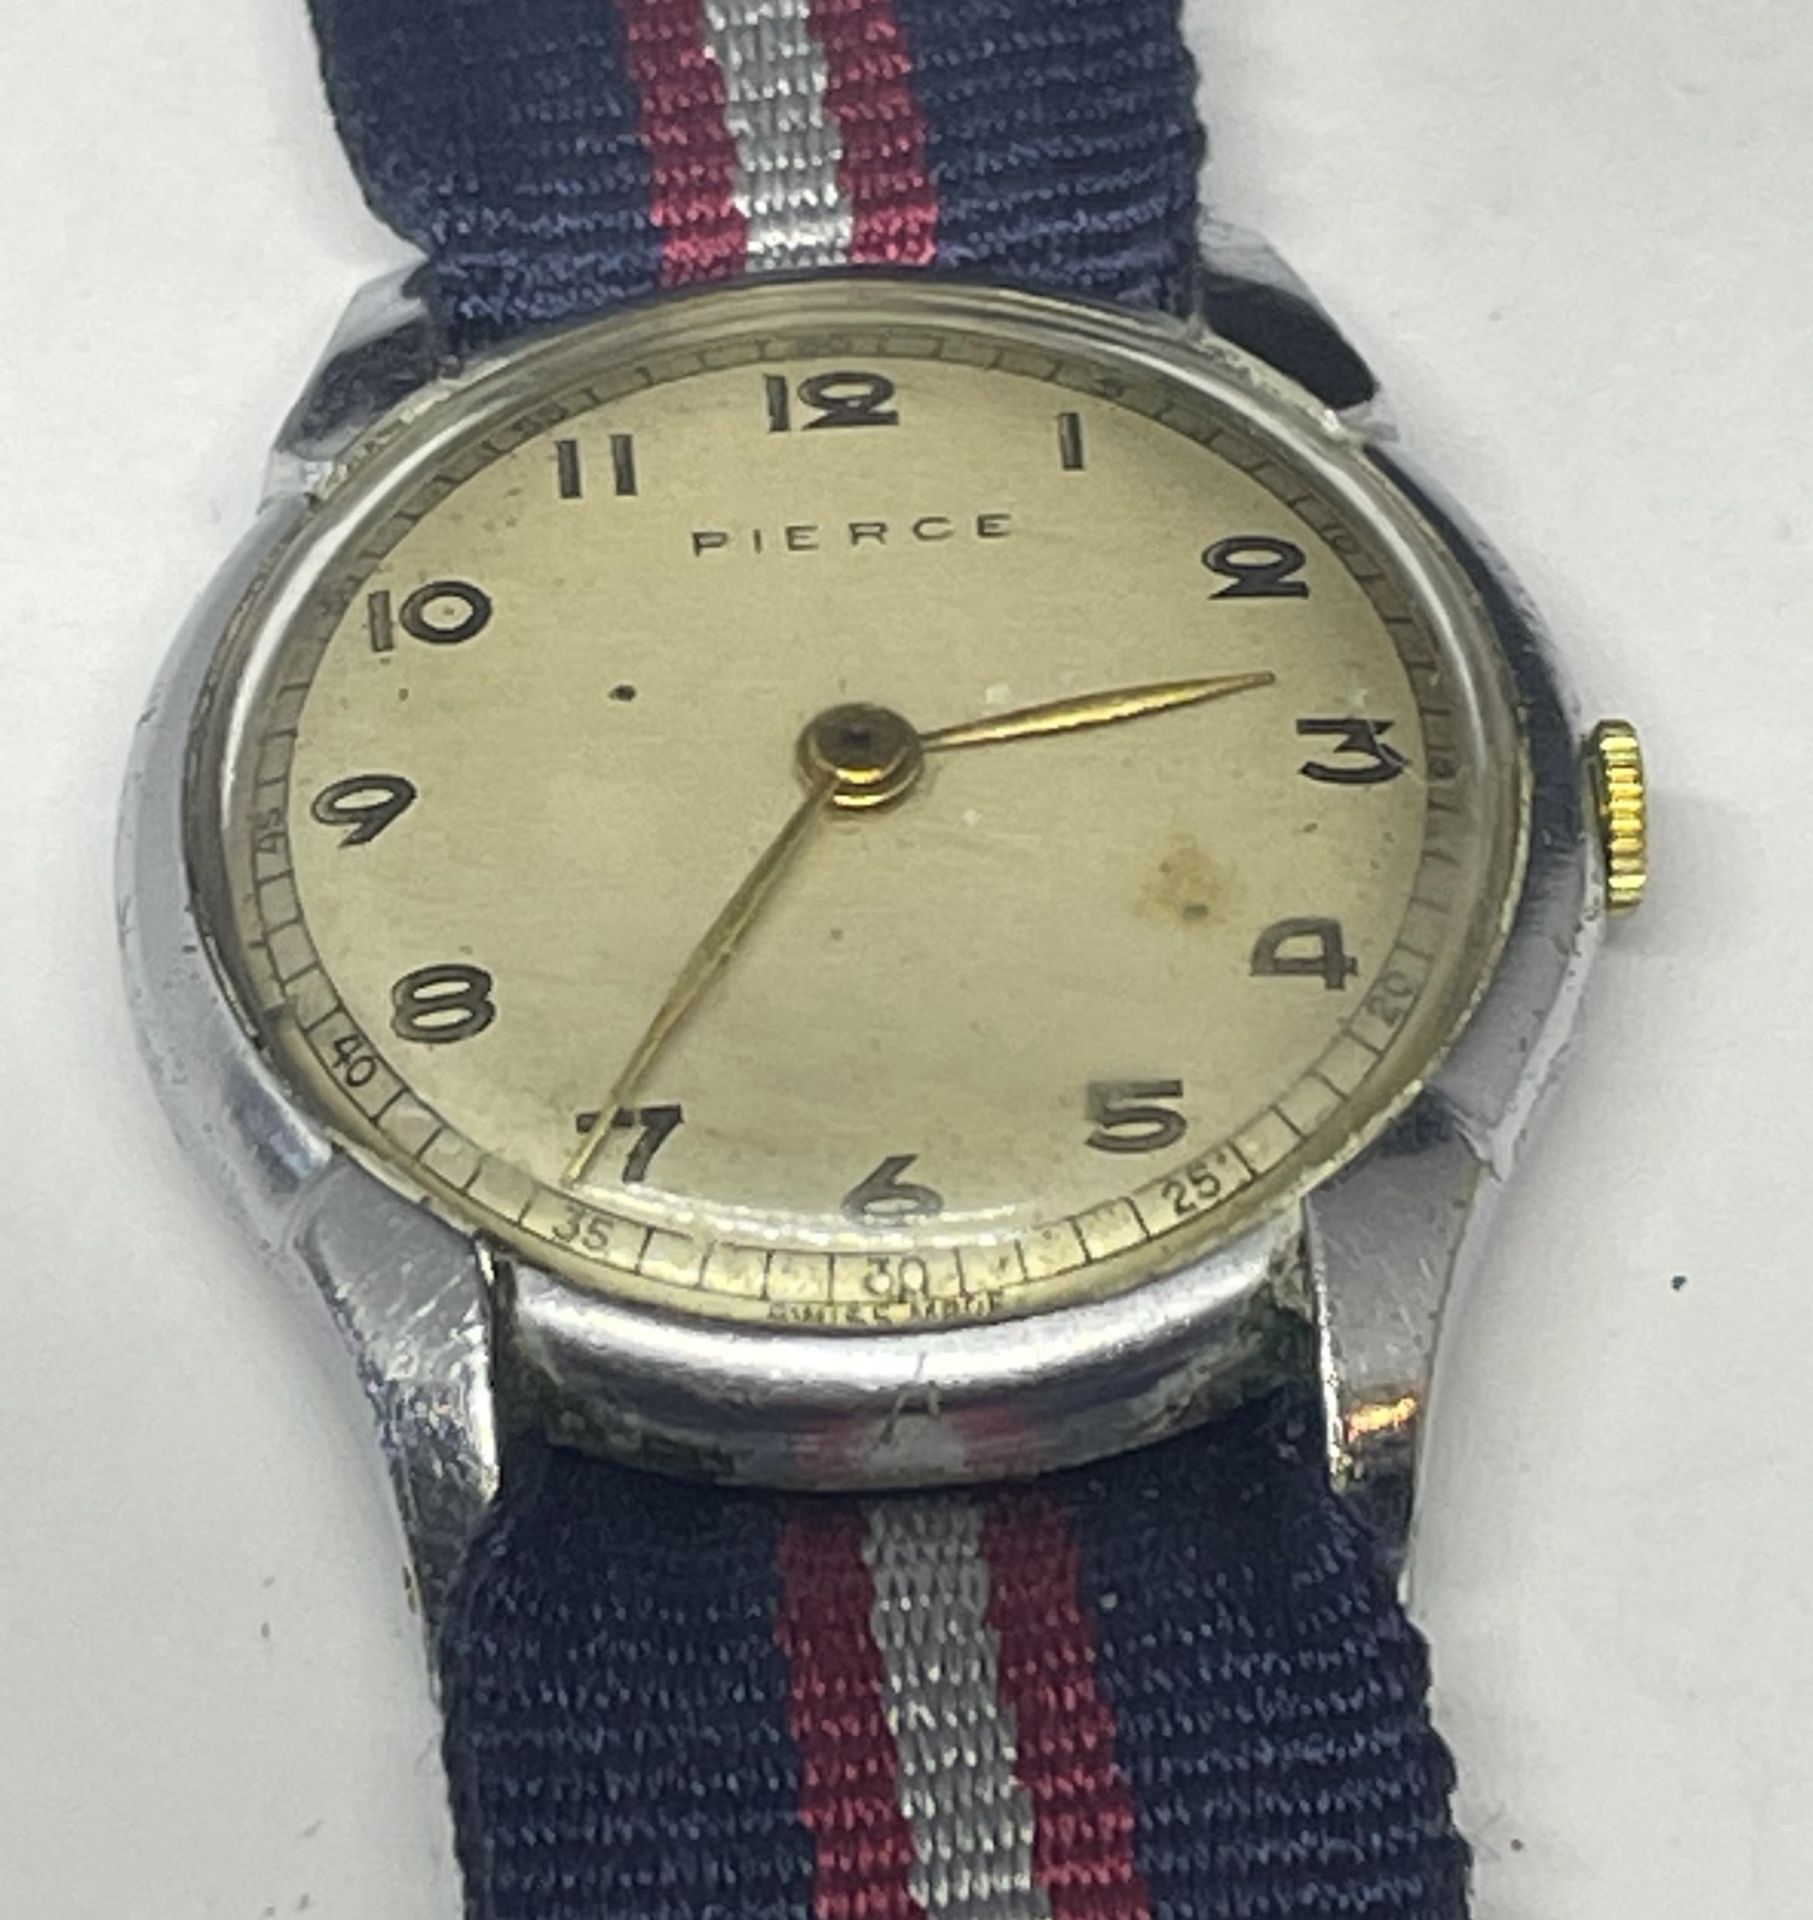 A PIERCE GENTS MILITARY STYLE WATCH, SEEN WORKING BUT NO WARRANTIES GIVEN